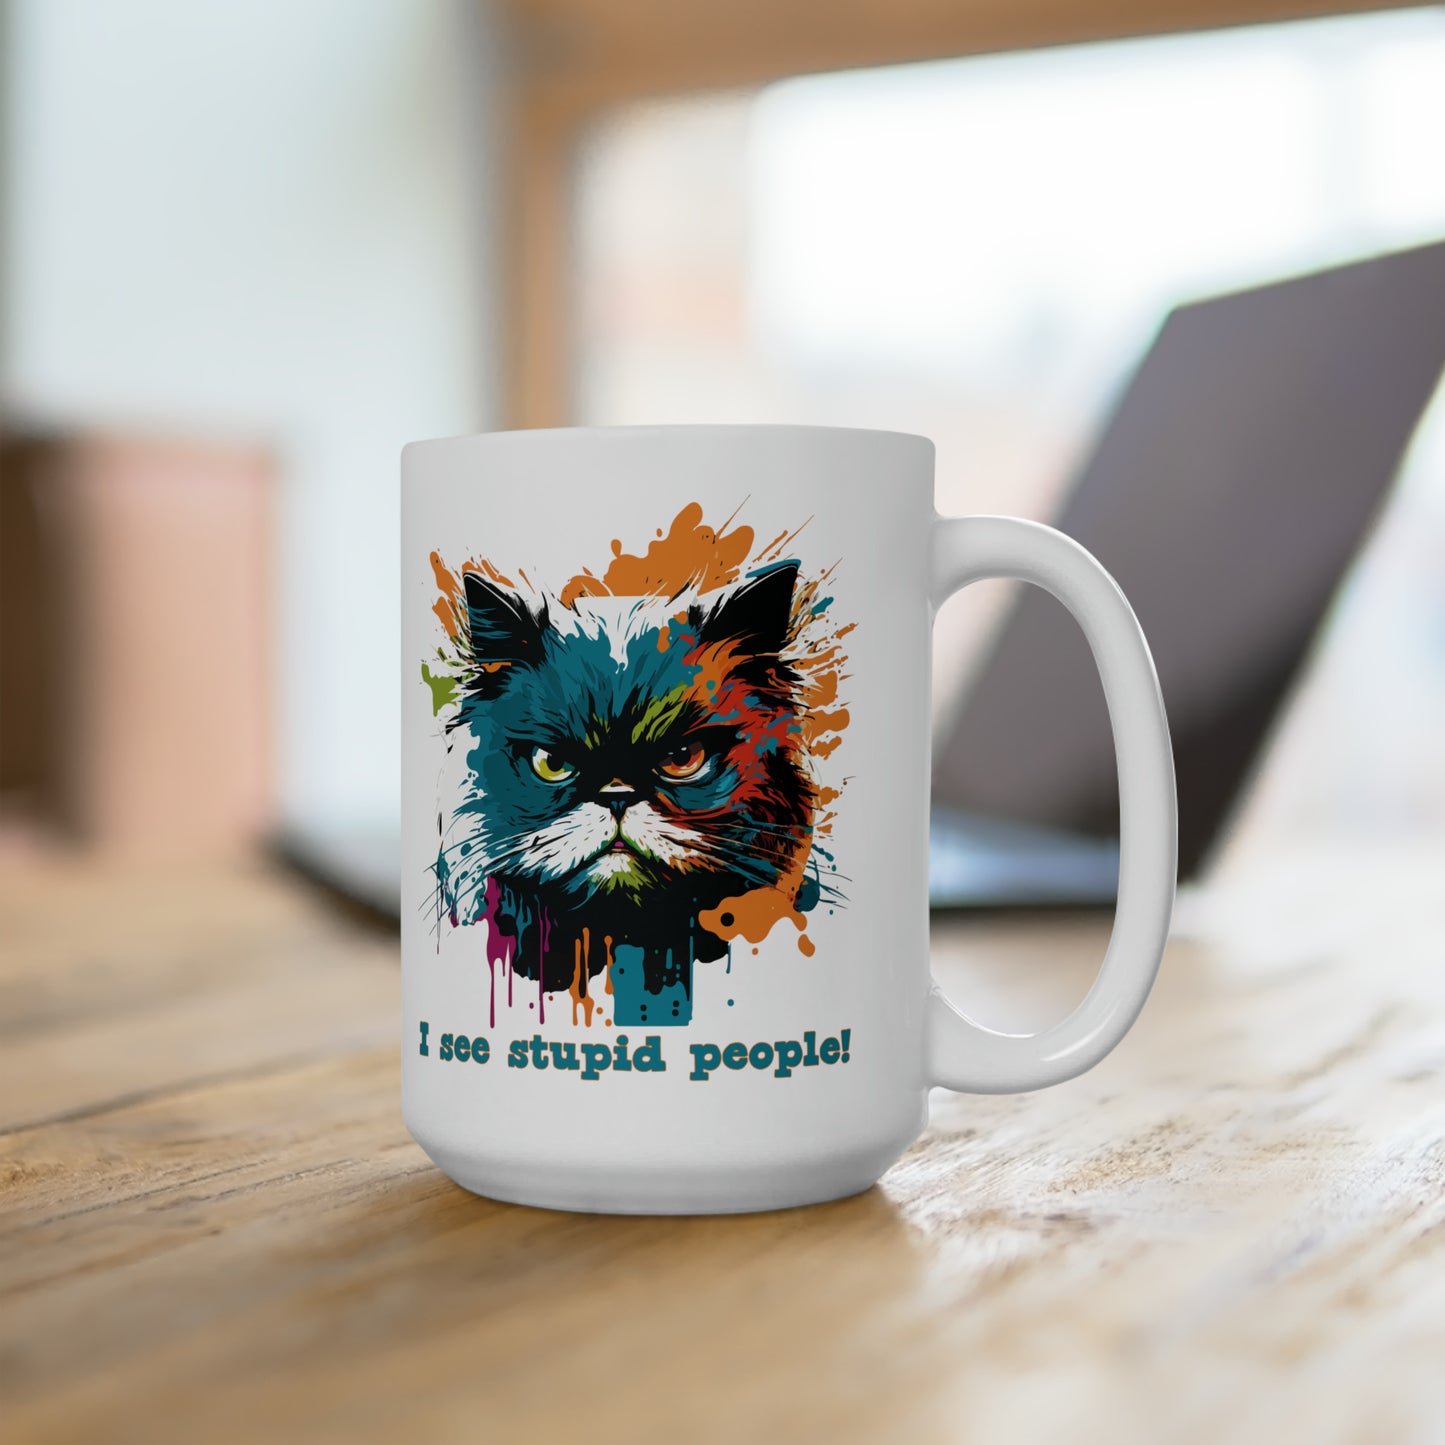 Sarcastic Cat Mug For Stupid People Hot Tea Cup For Funny Feline Gift